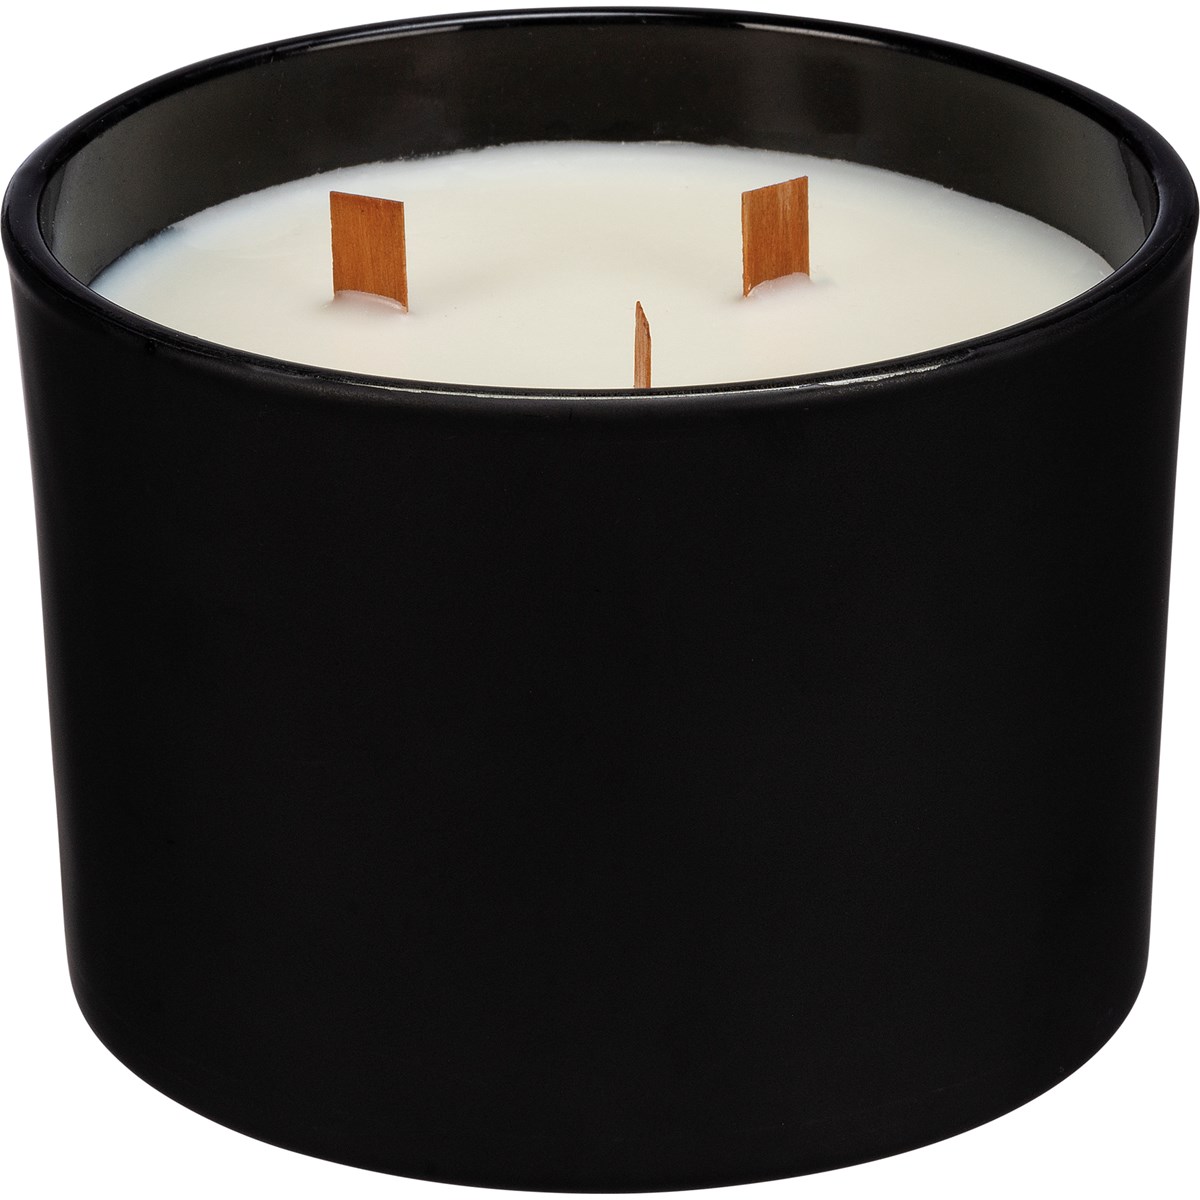 Dog Lover Candle - Soy Wax, Glass, Wood